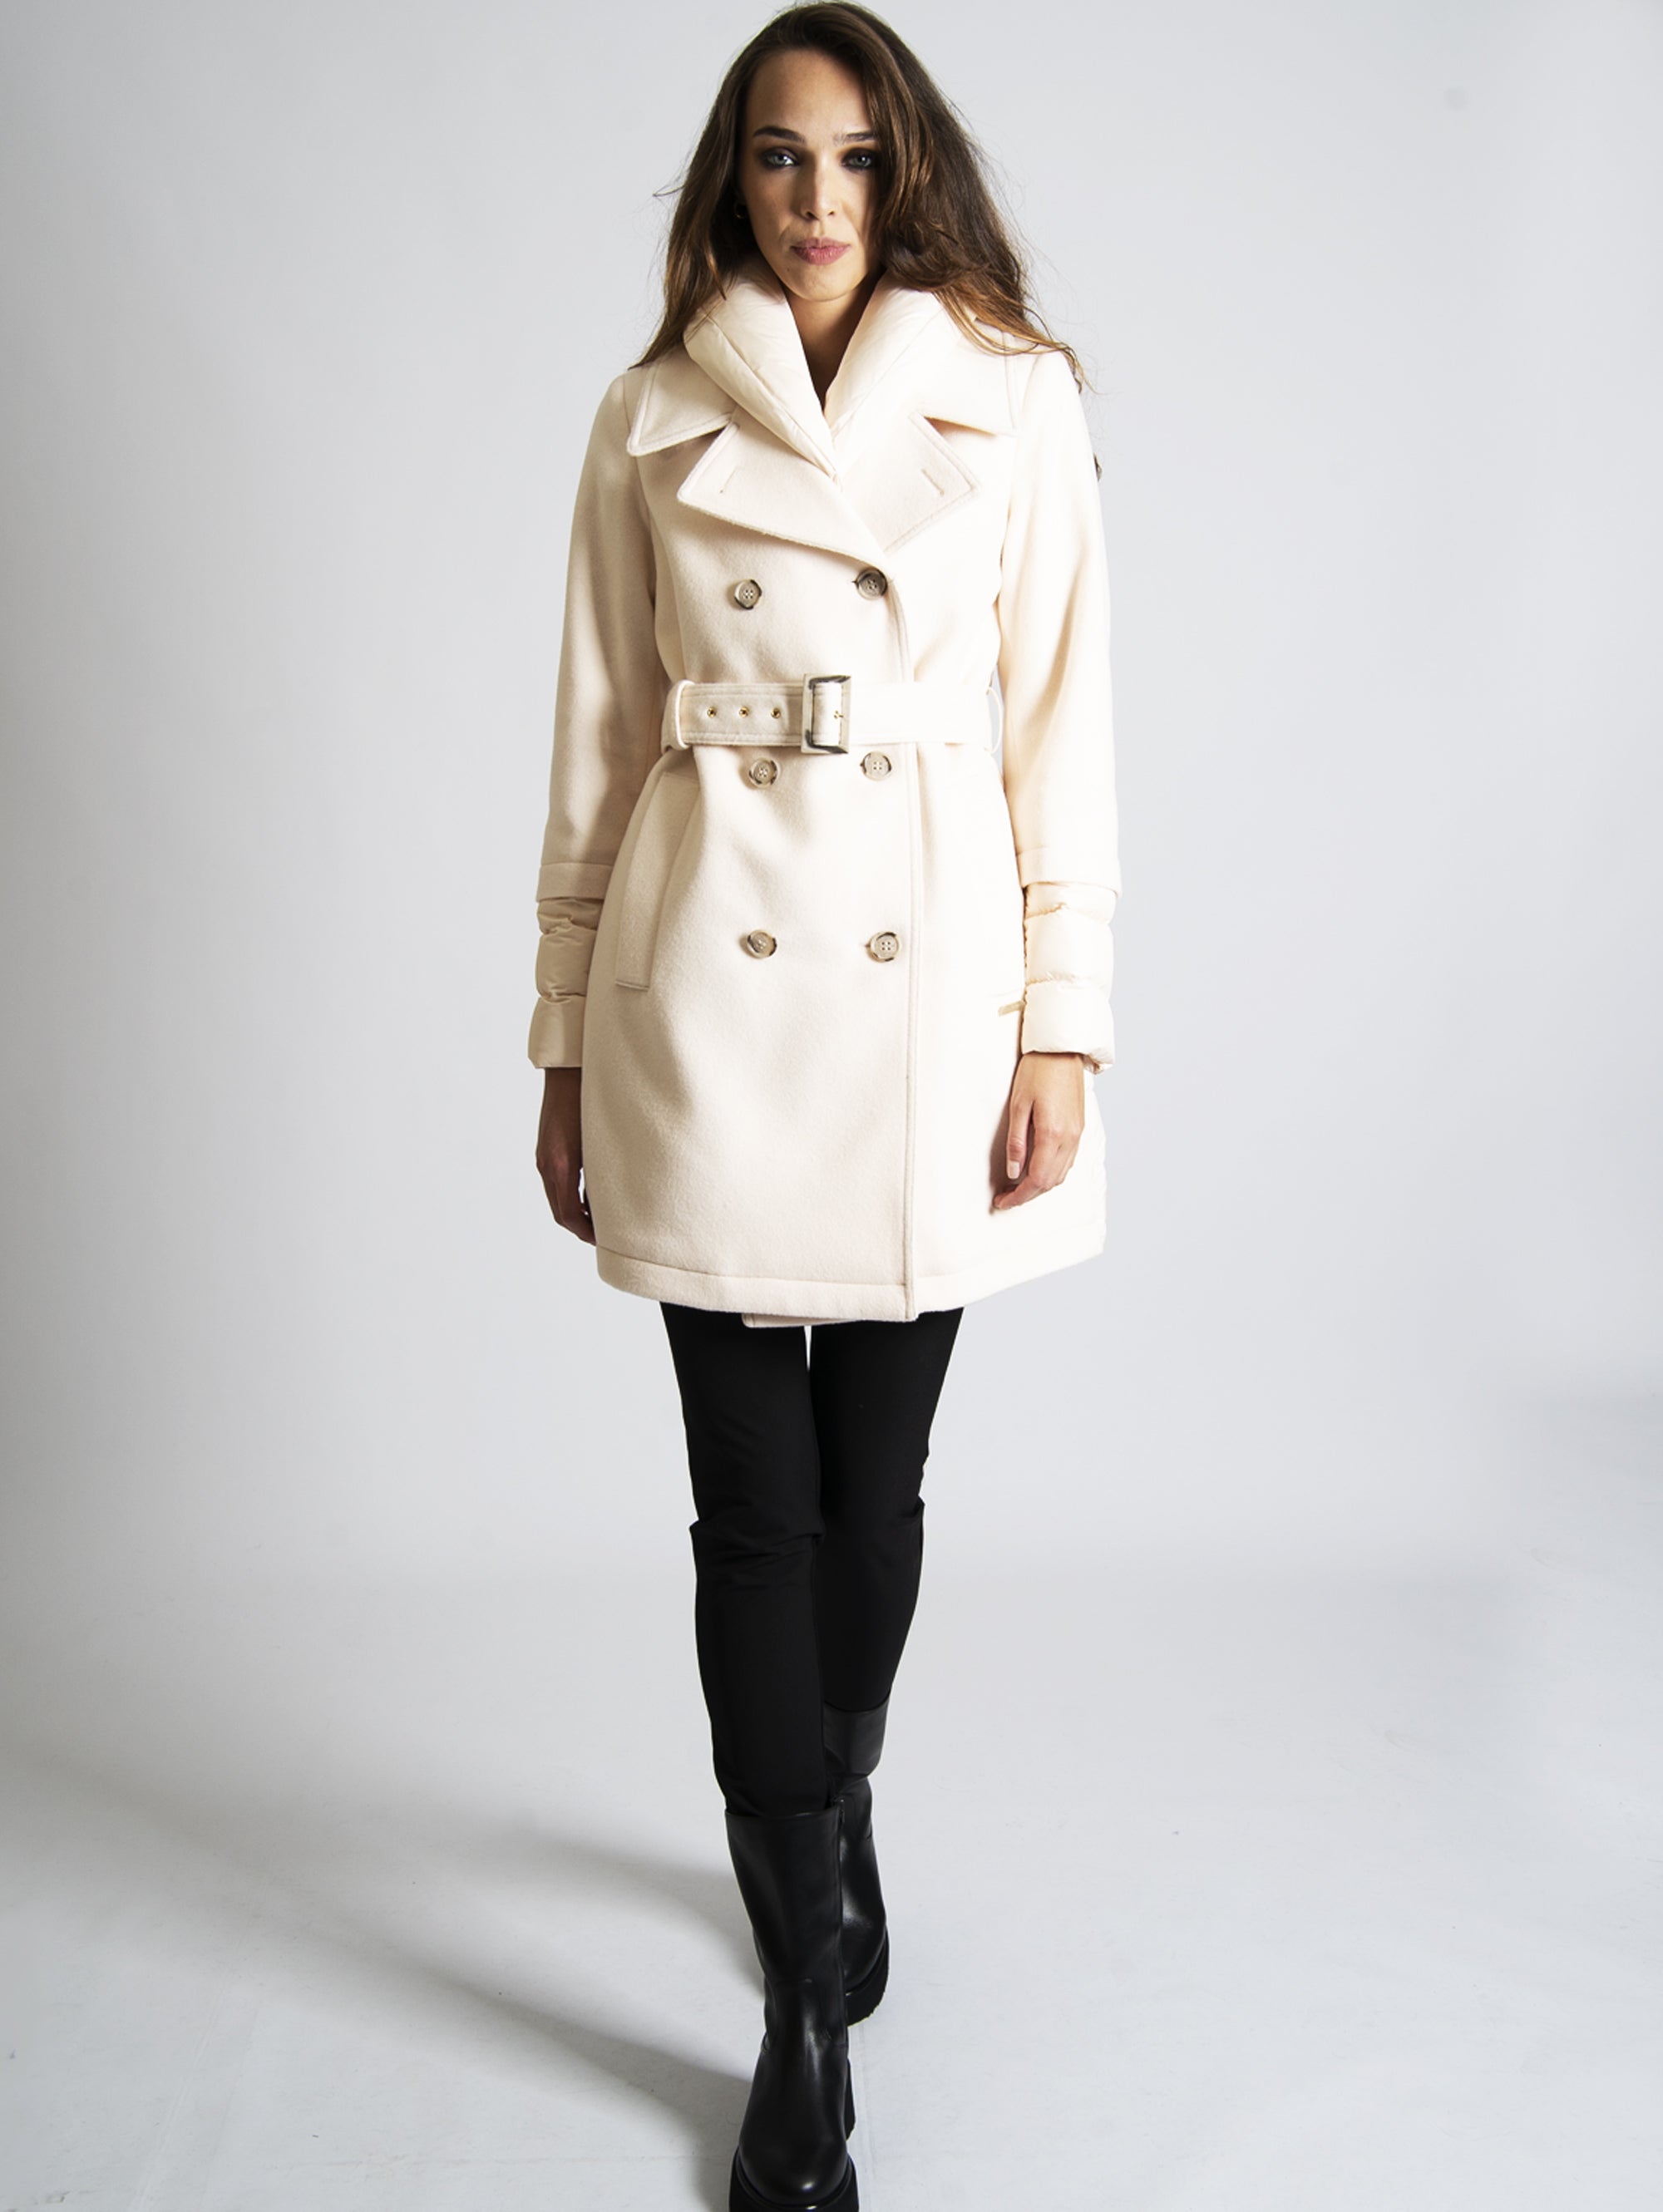 WOOLRICH-Cappotto Trench Ibrido Avorio-TRYME Shop